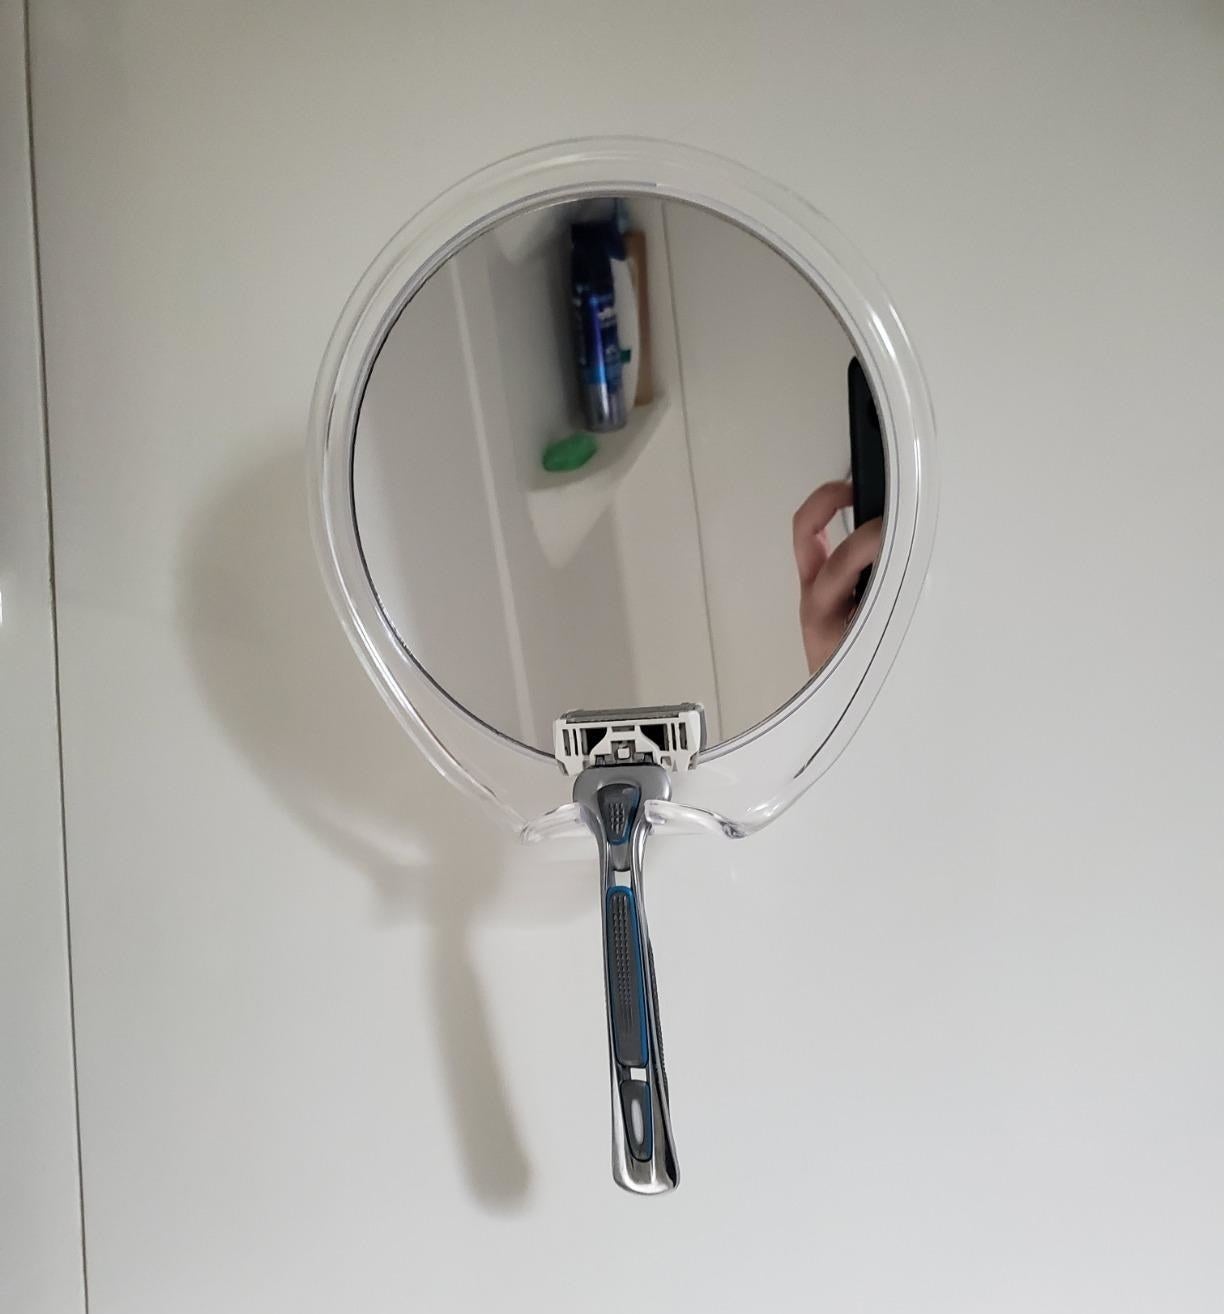 reviewer image of the mirror on a shower wall with a razor hanging off the build in razor holder